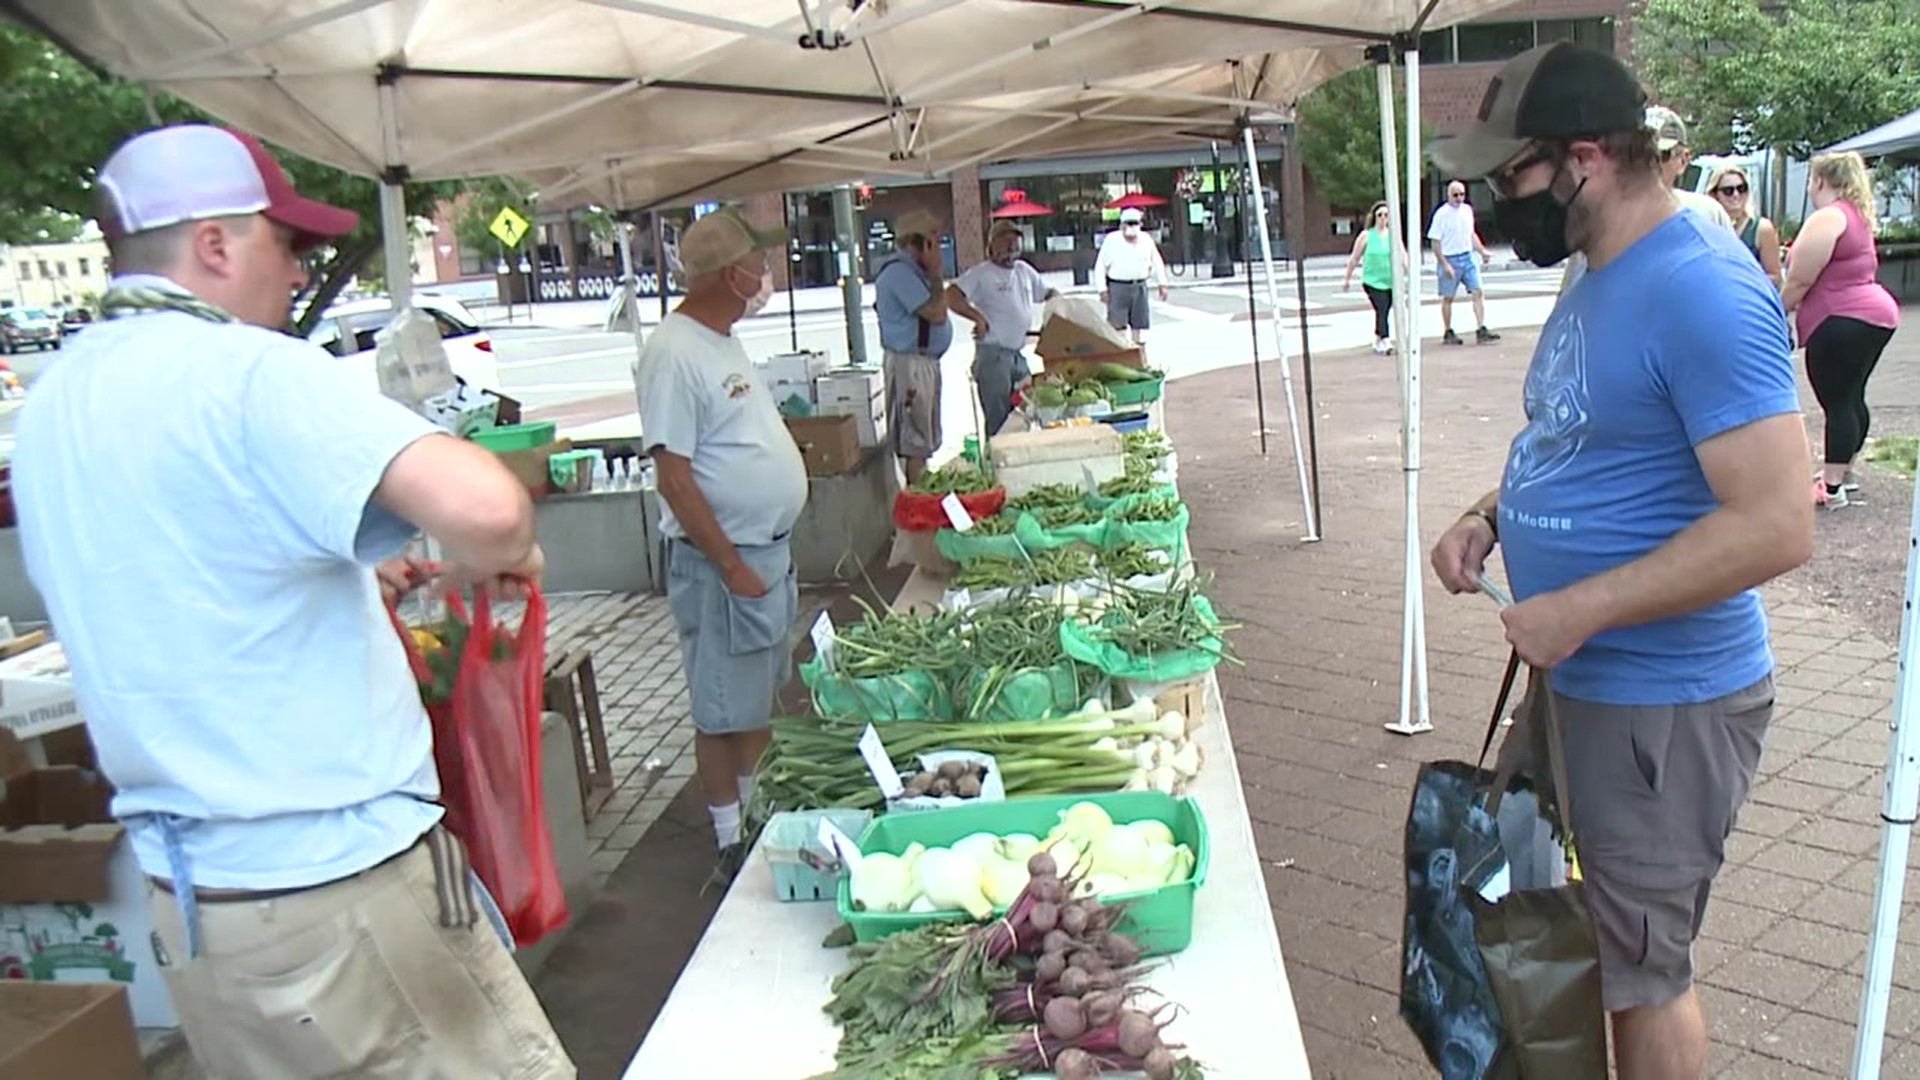 WilkesBarre farmers market returns with some changes